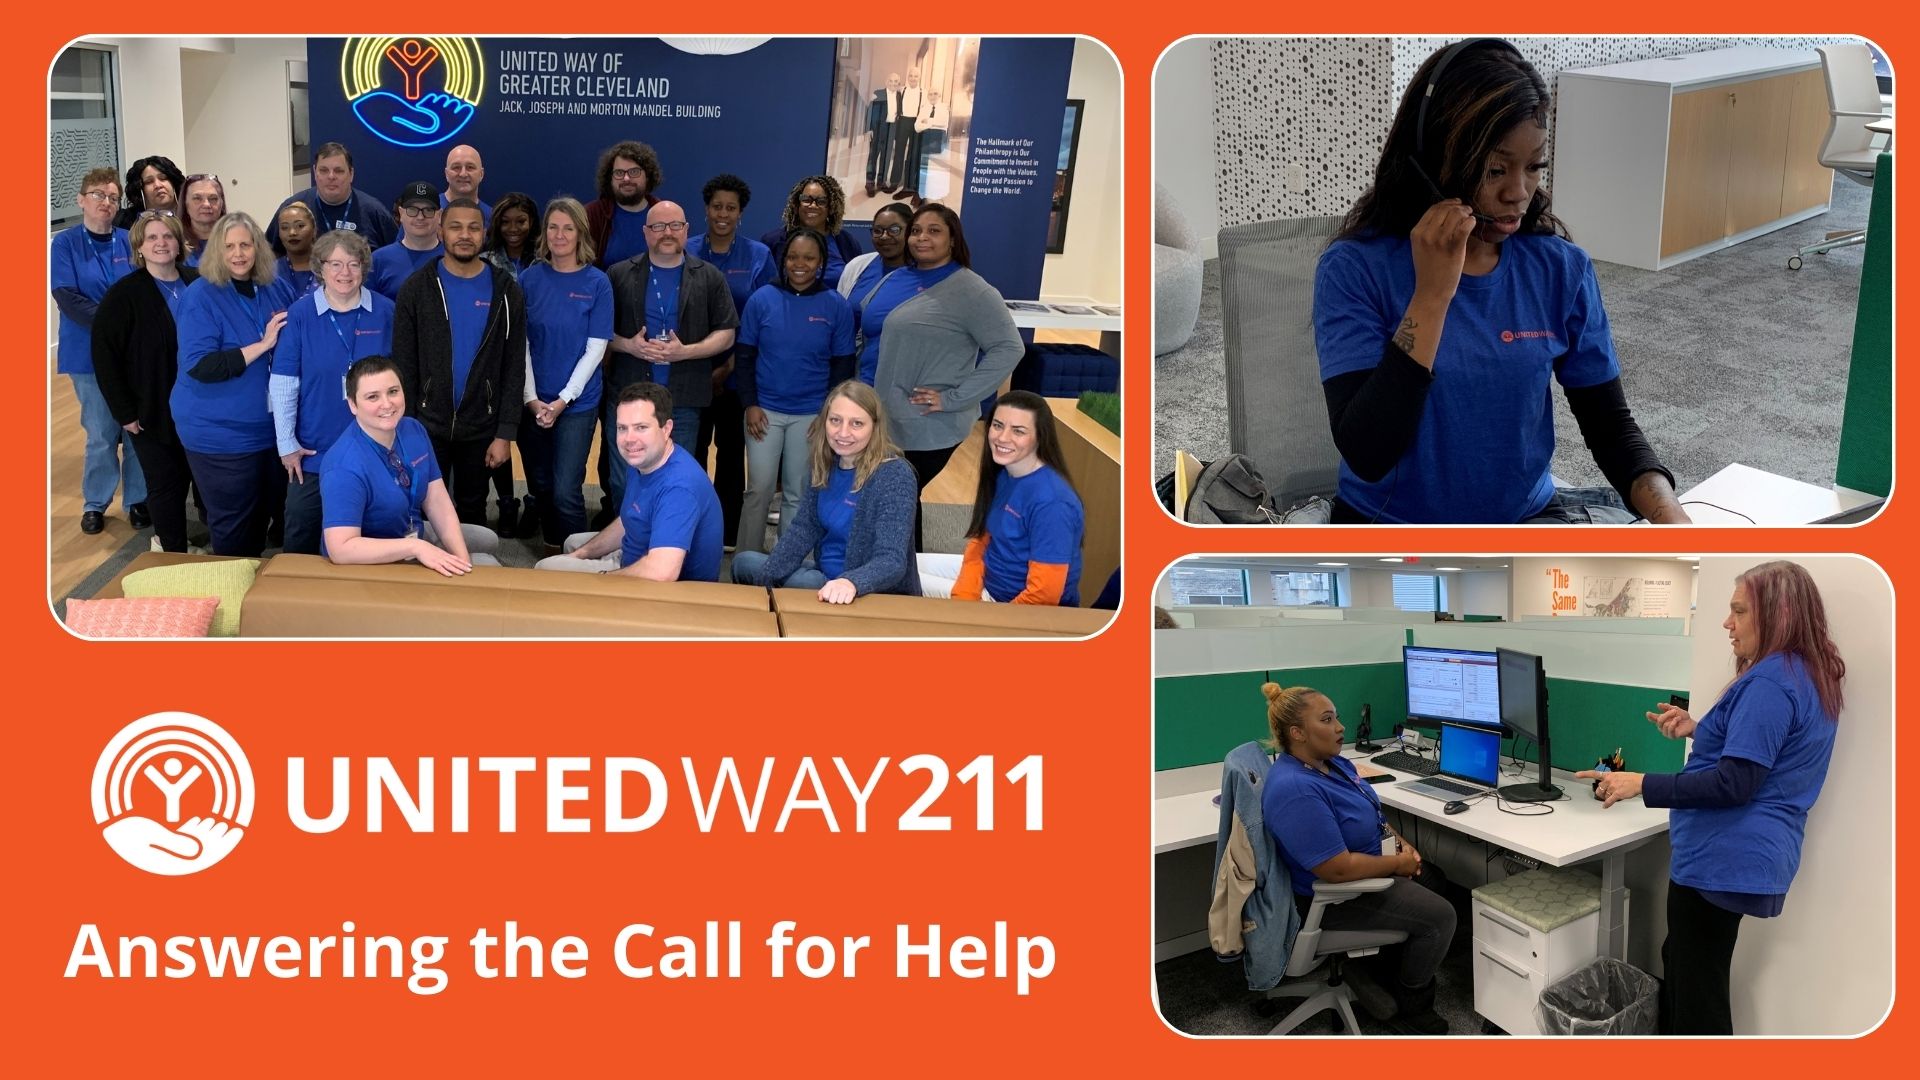 United Way 211 - Answering the Call